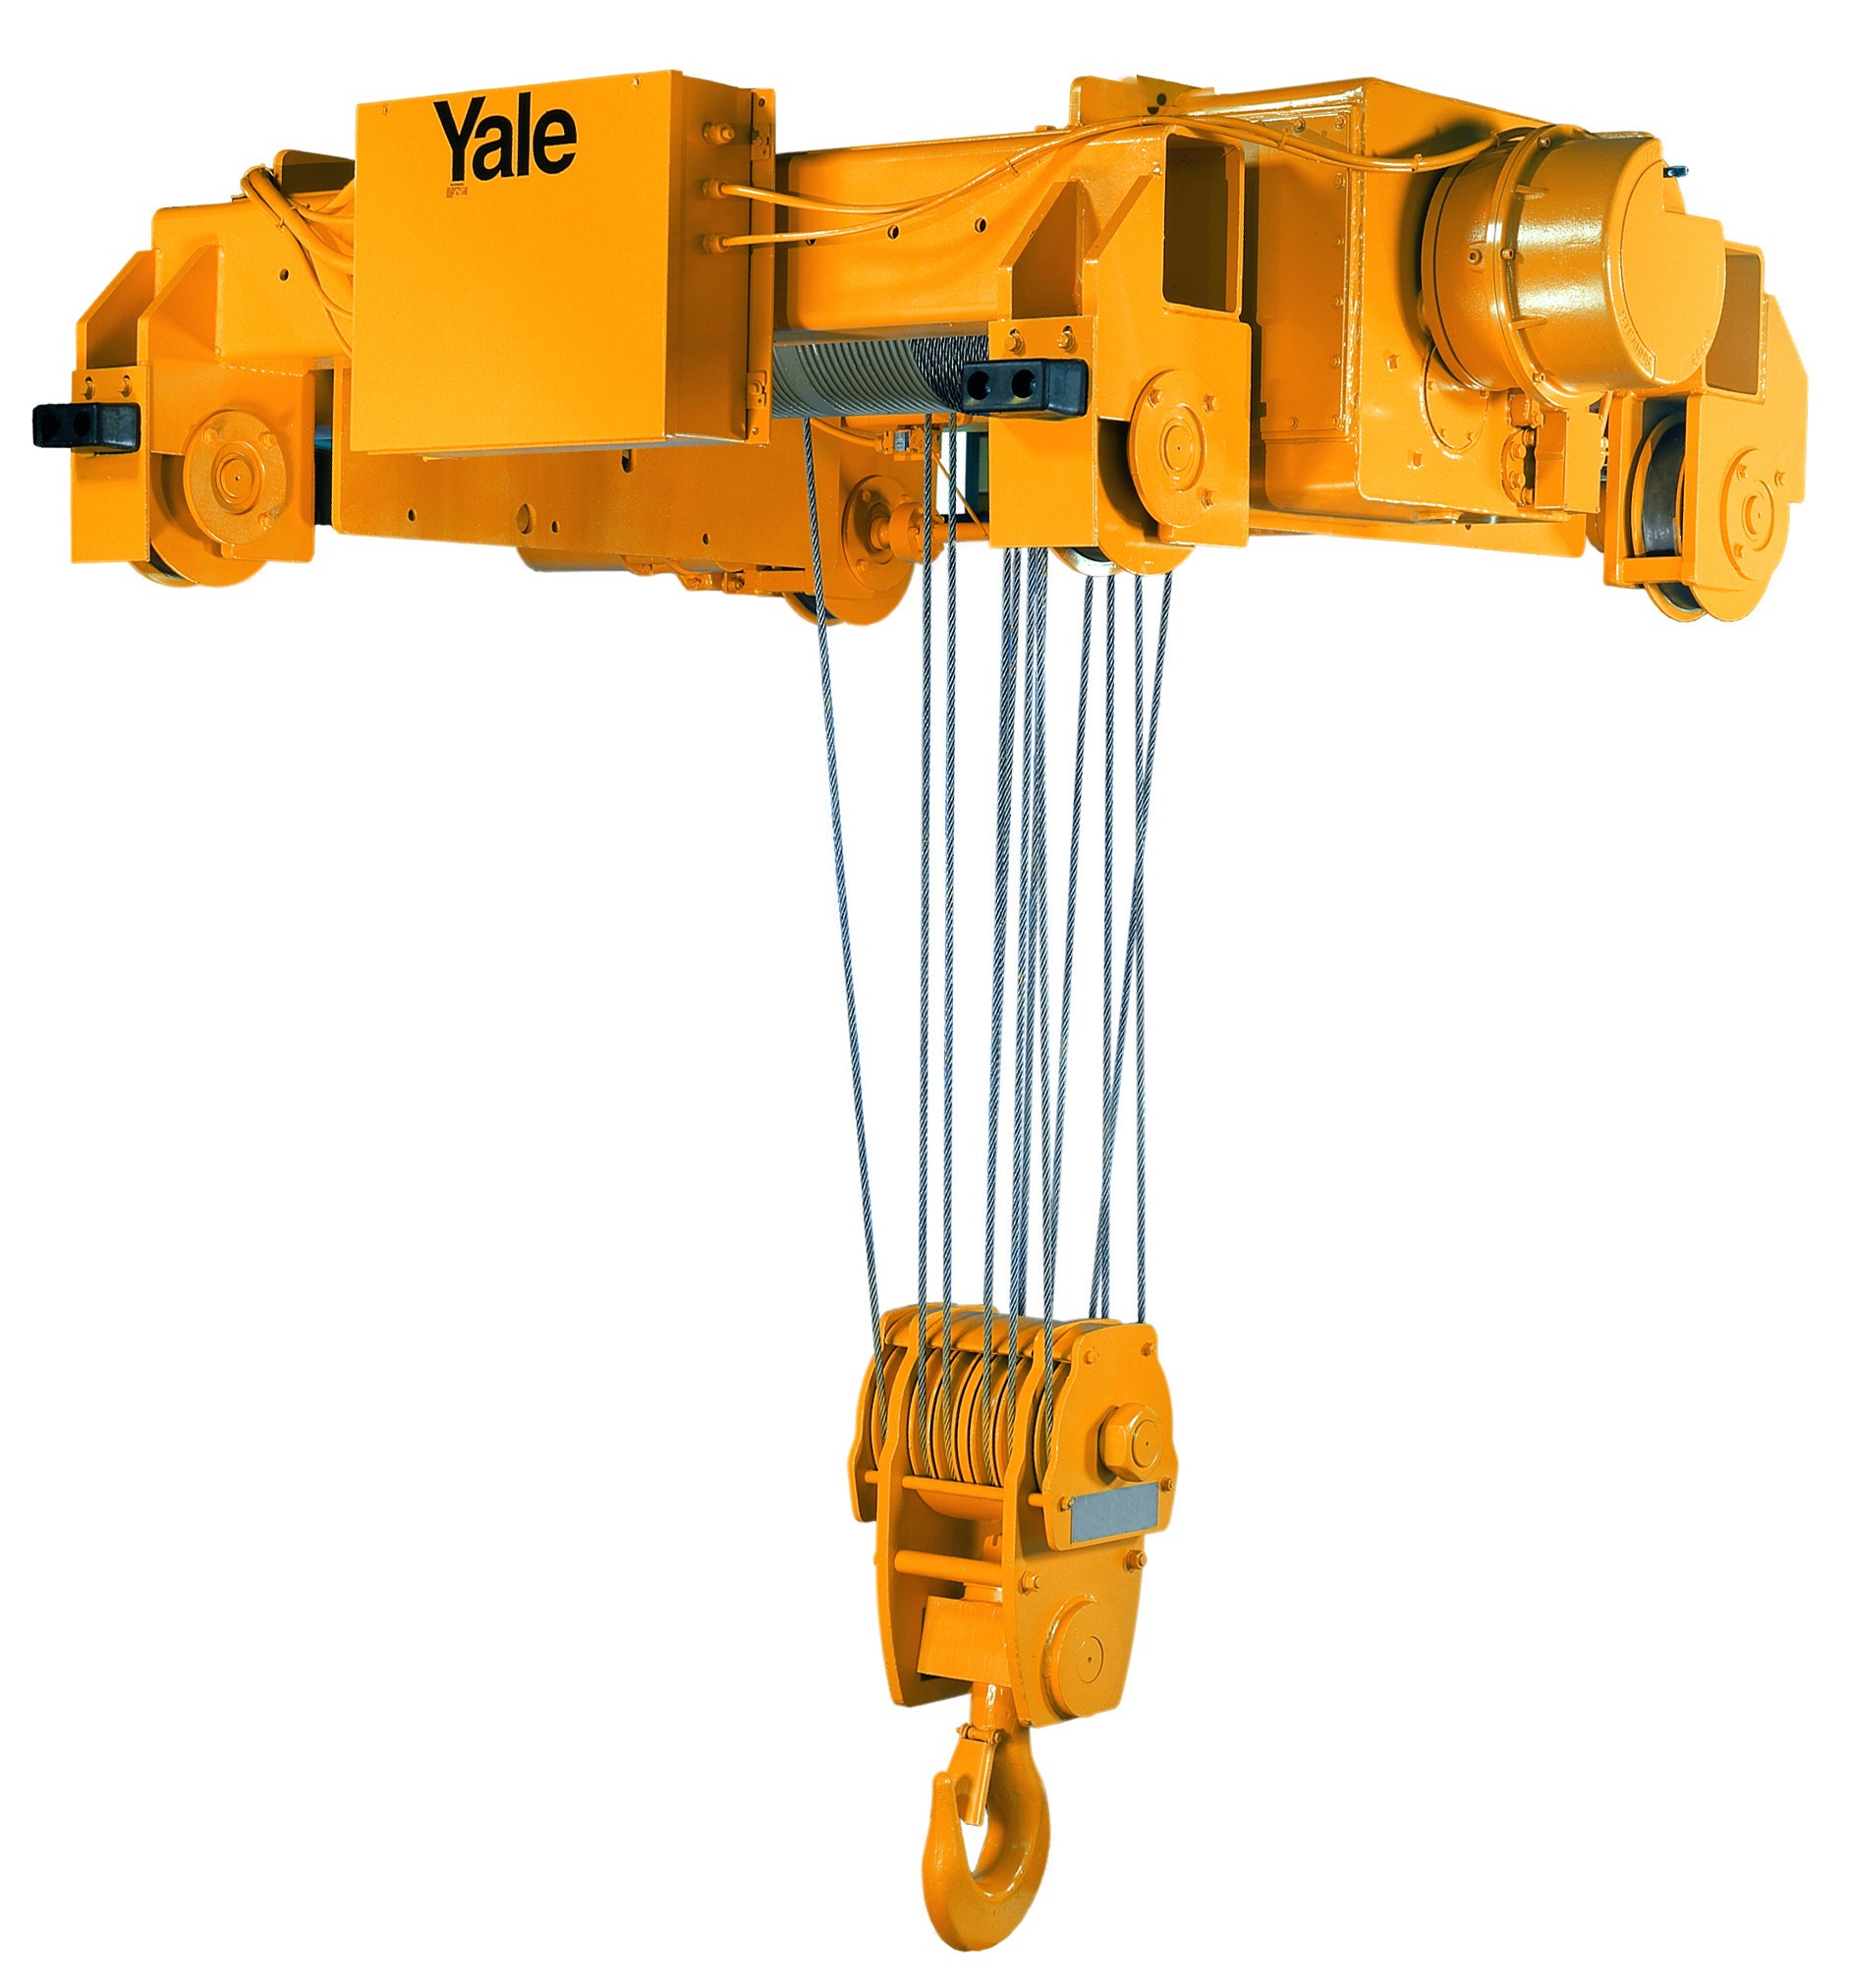 YALE - Cable King 10 Ton Electric Wire Rope Hoist (21fpm & 150' Lift Double Reeve)